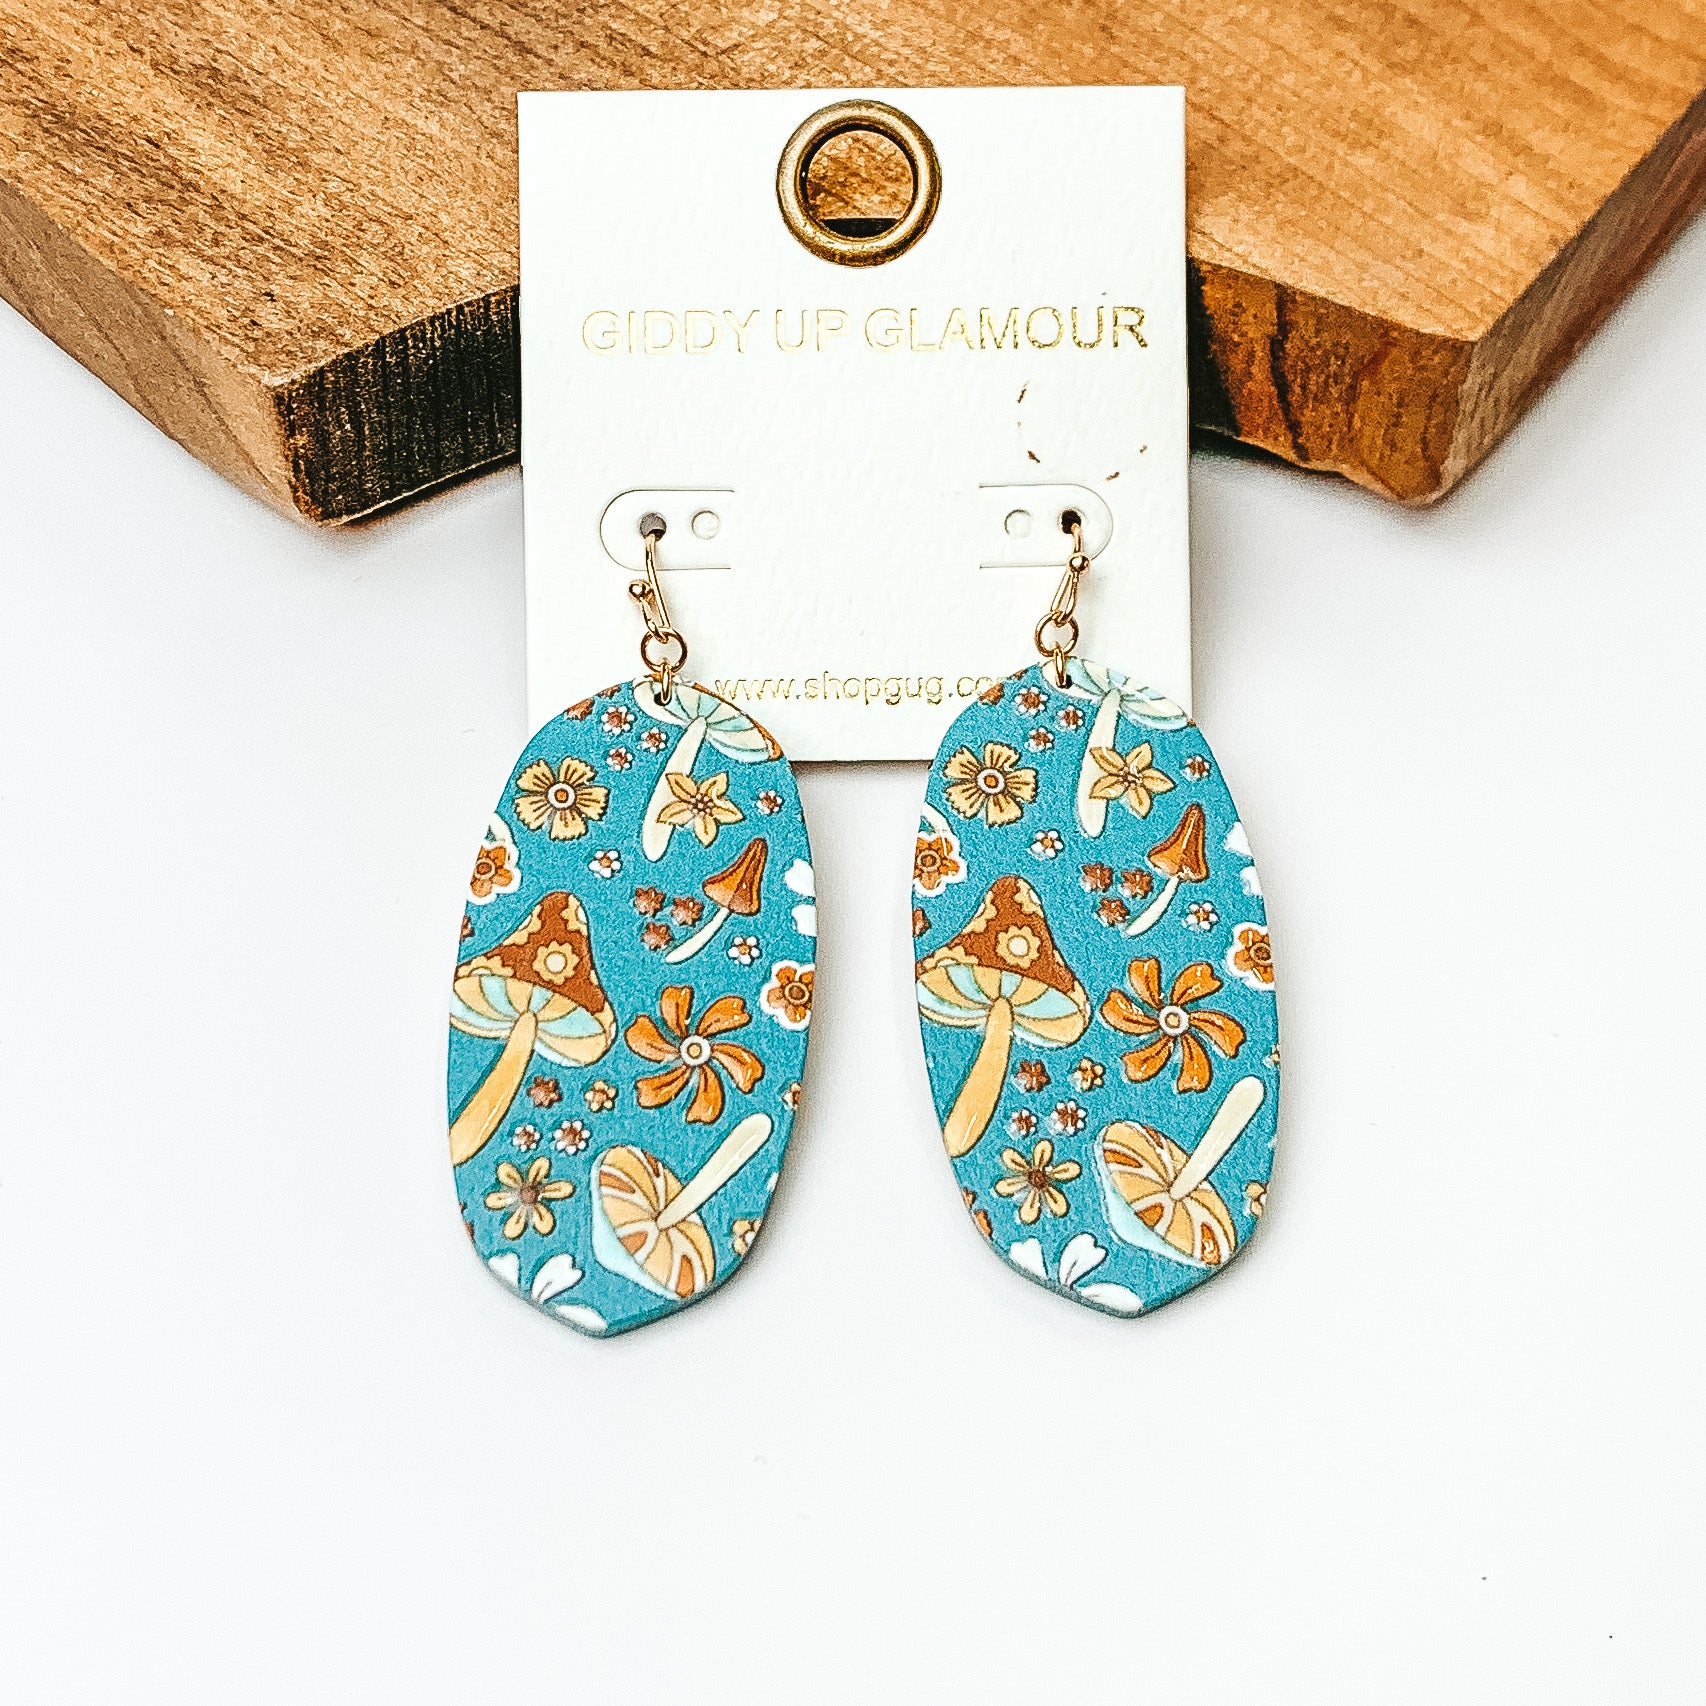 Pictured are oval drop earrings on gold fish hooks. These earrings have a blue background with a mix of flowers and mushrooms print. These earrings are pictured on a white background in front of a wood block. 